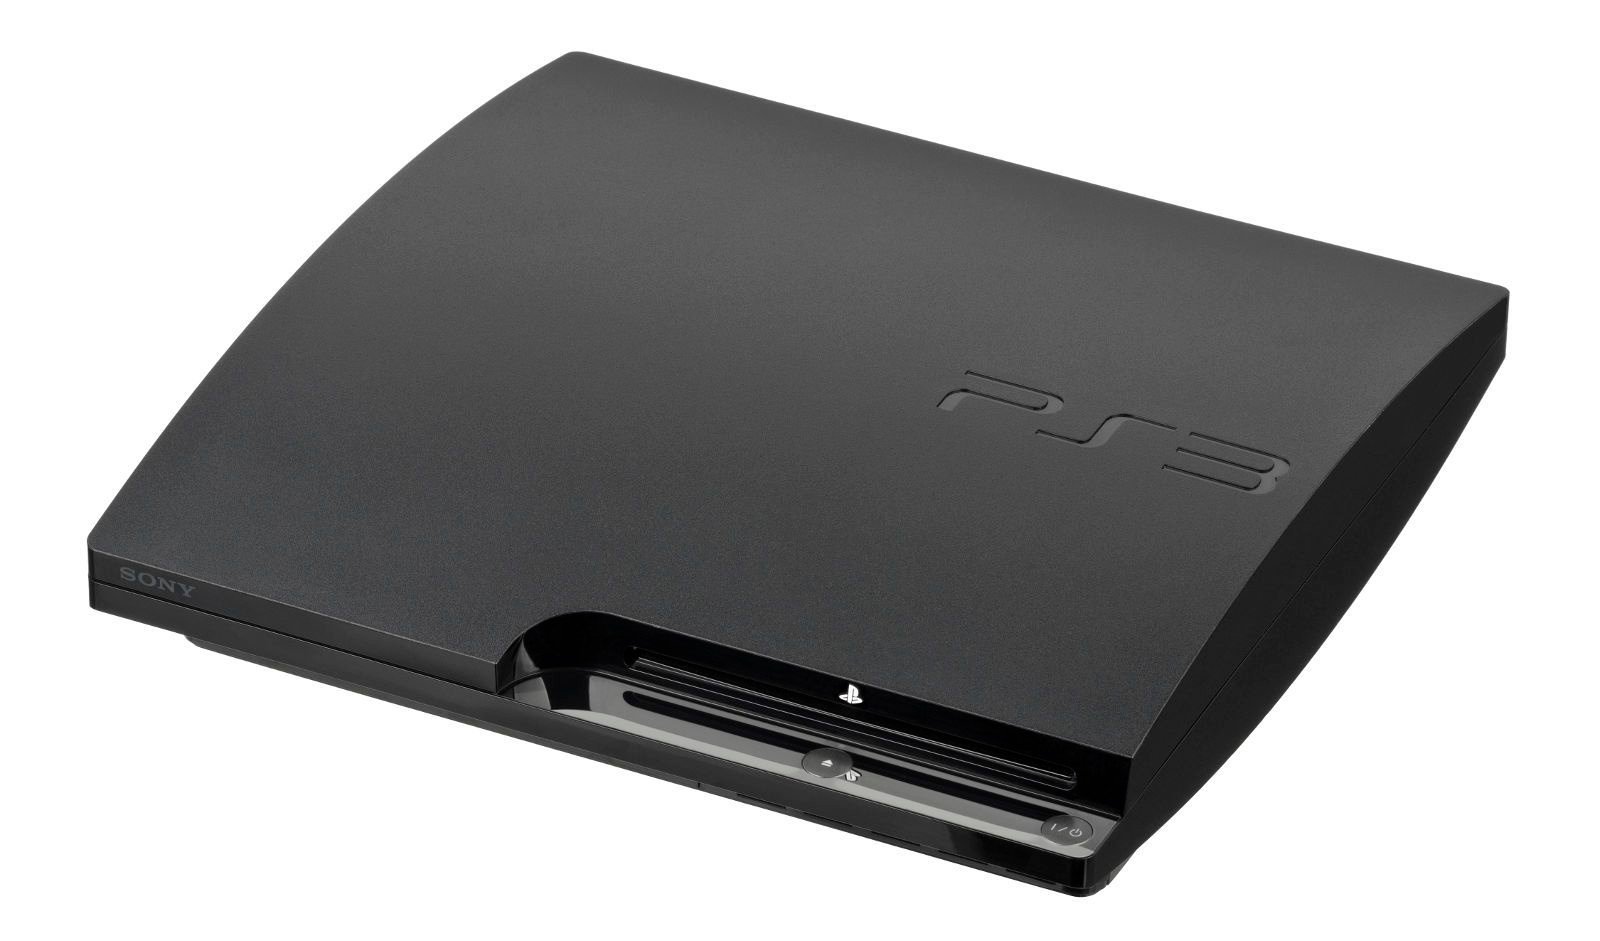 commentator Citroen Renaissance PS3 Firmware Update 4.90 Released, Here's What It Does